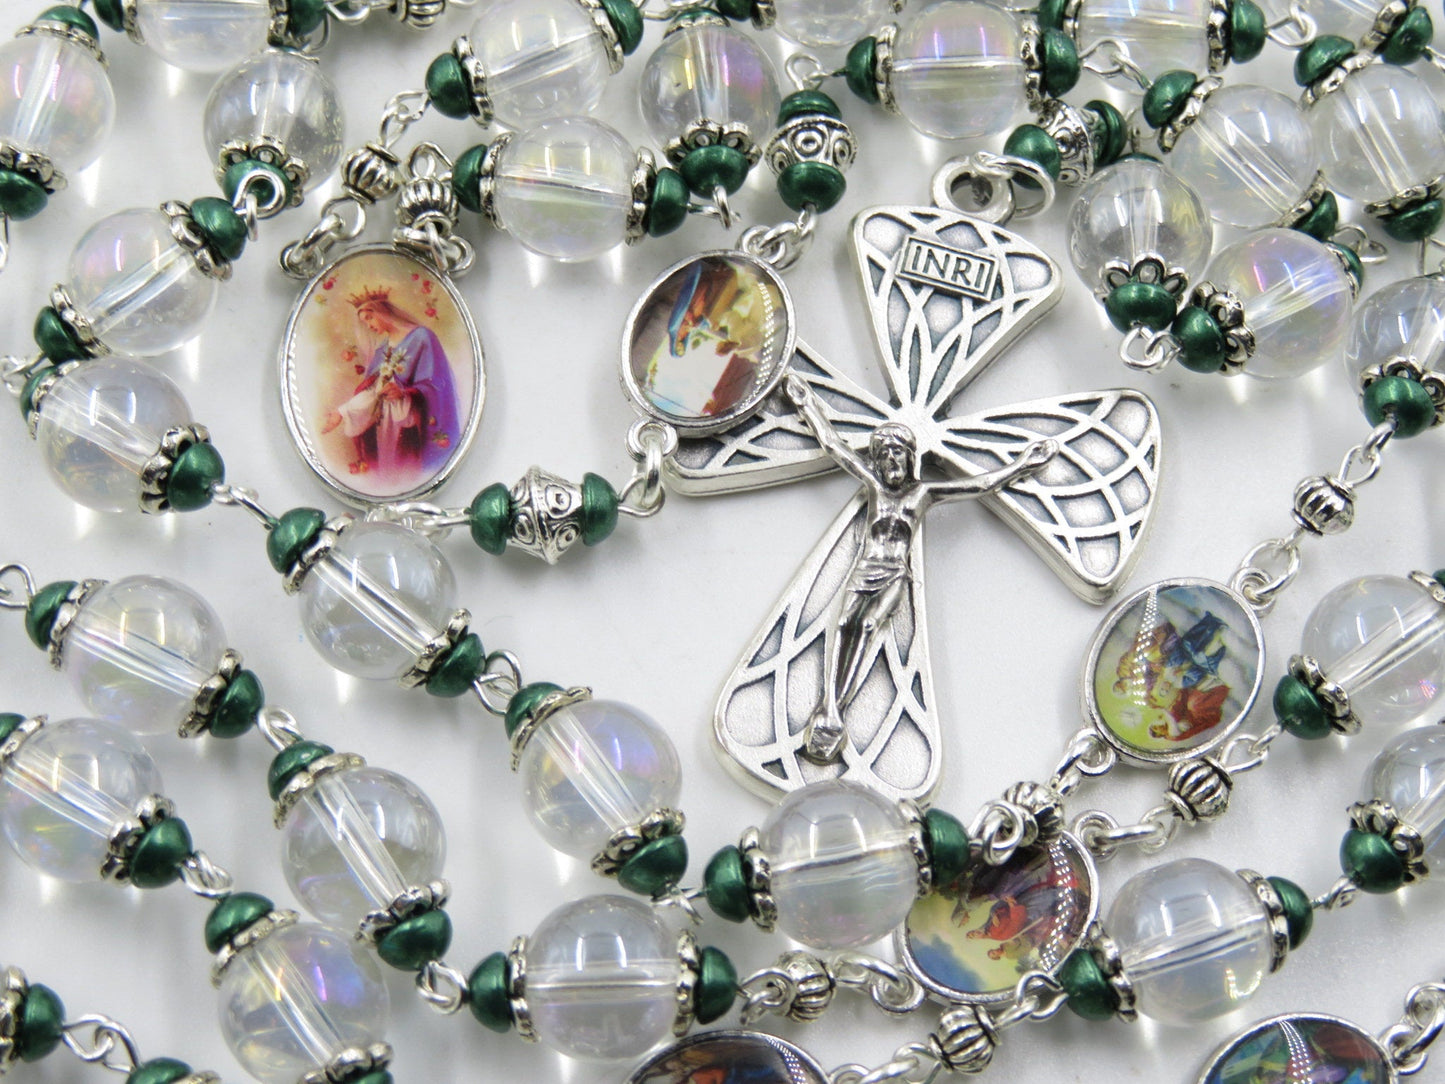 Heirloom Rosary of the Seven Joys of Our Lady, prayer chaplet beads, Dolor rosary beads, dolour rosaries, Rosary gift, Rosary.